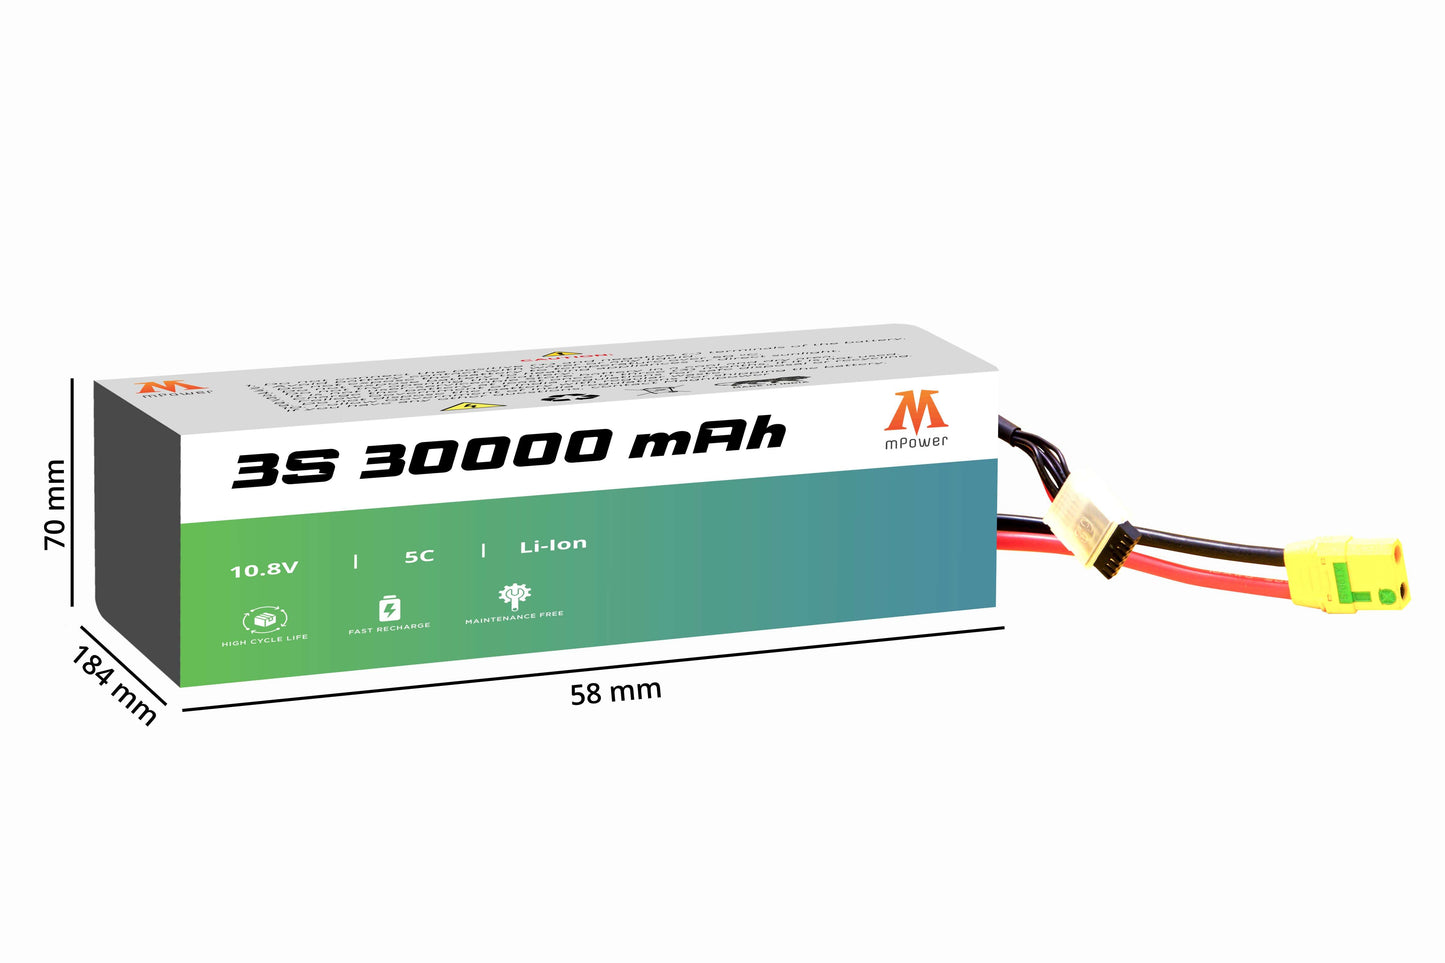 mPower 3S 30000mAh Lithium-Ion Battery for Surveillance Drones